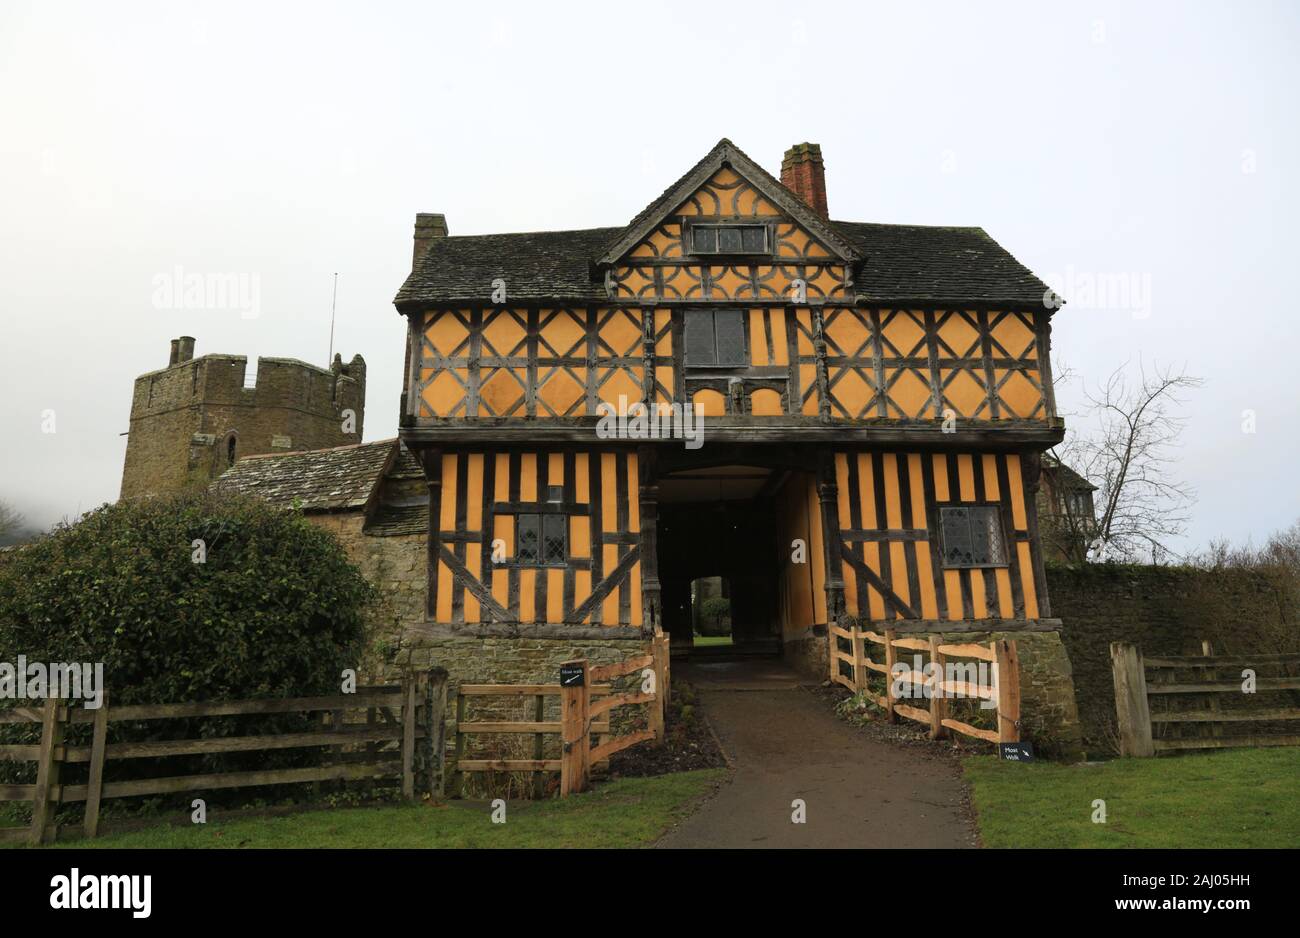 The 17th century gatehouse at Stokesay castle, Craven arms, Shropshire, UK. Stock Photo